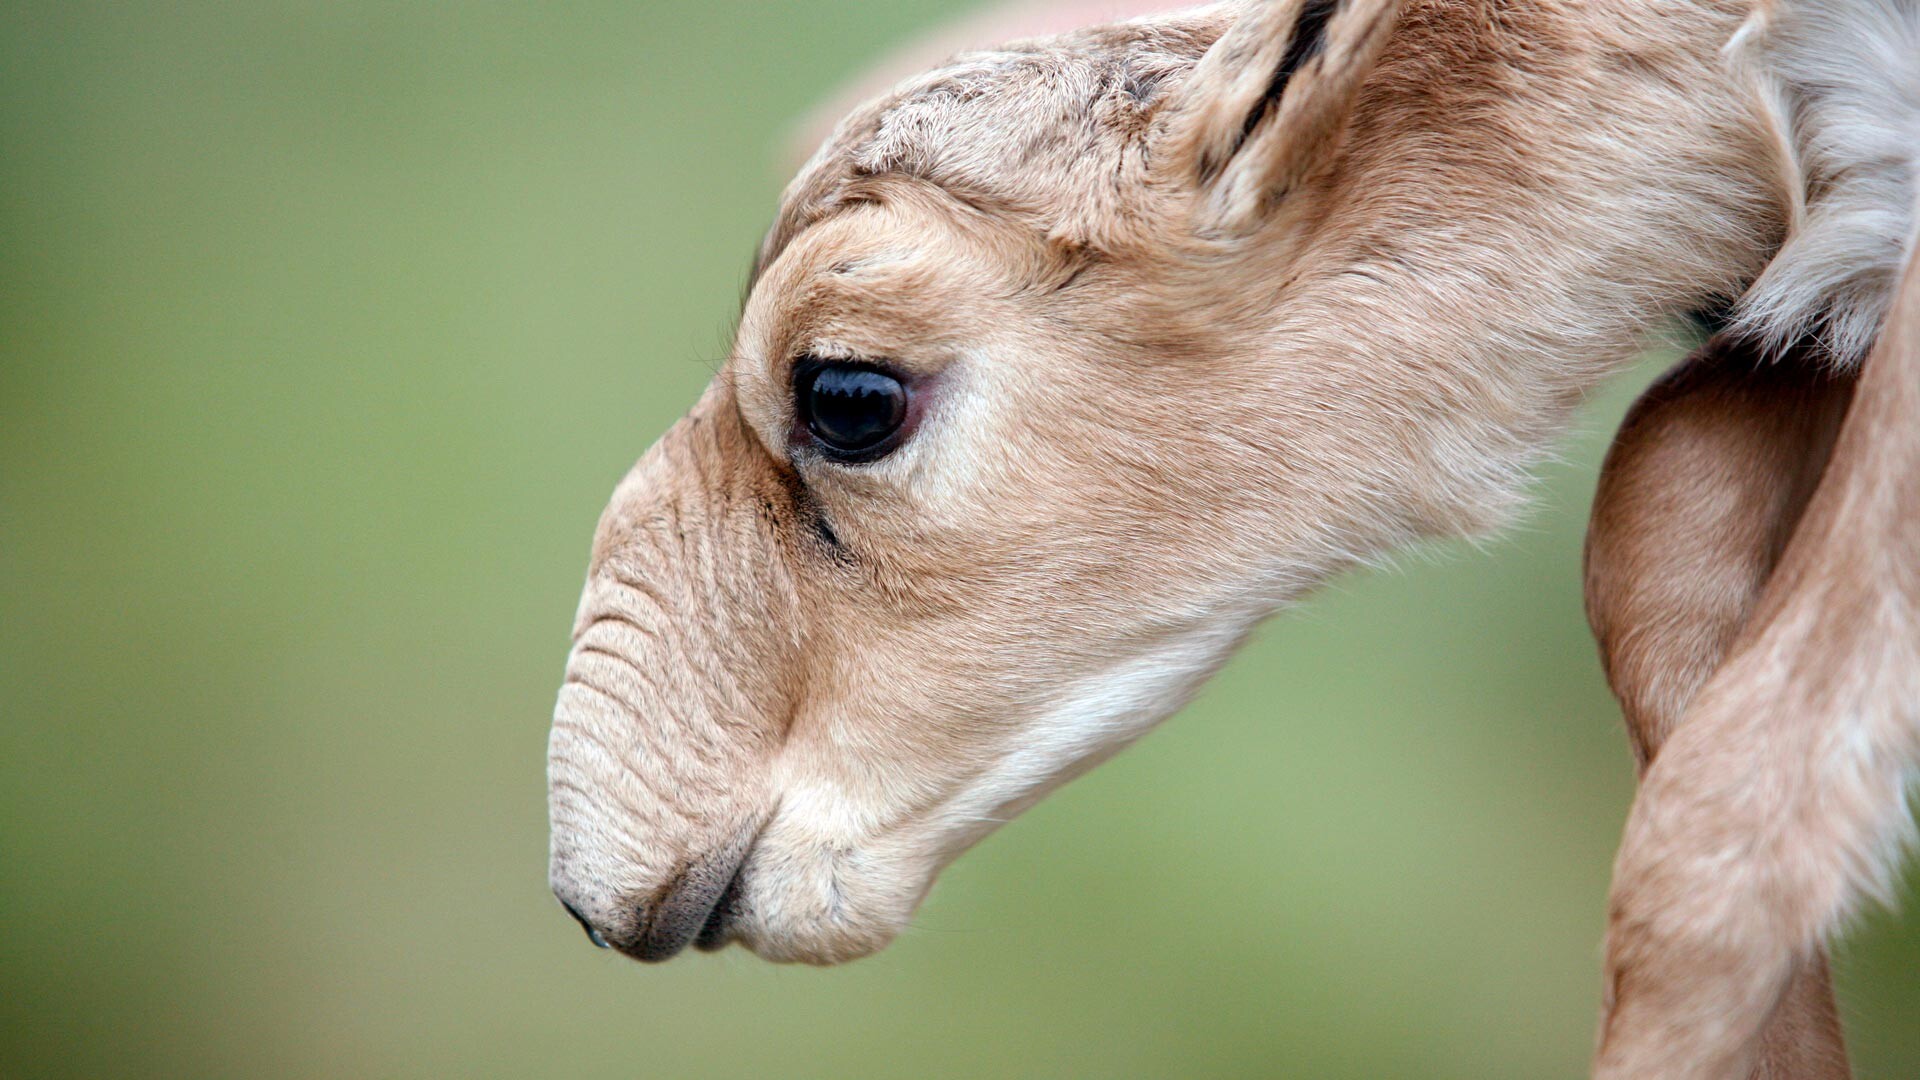 5 facts about a rare steppe antelope called the saiga - Russia Beyond